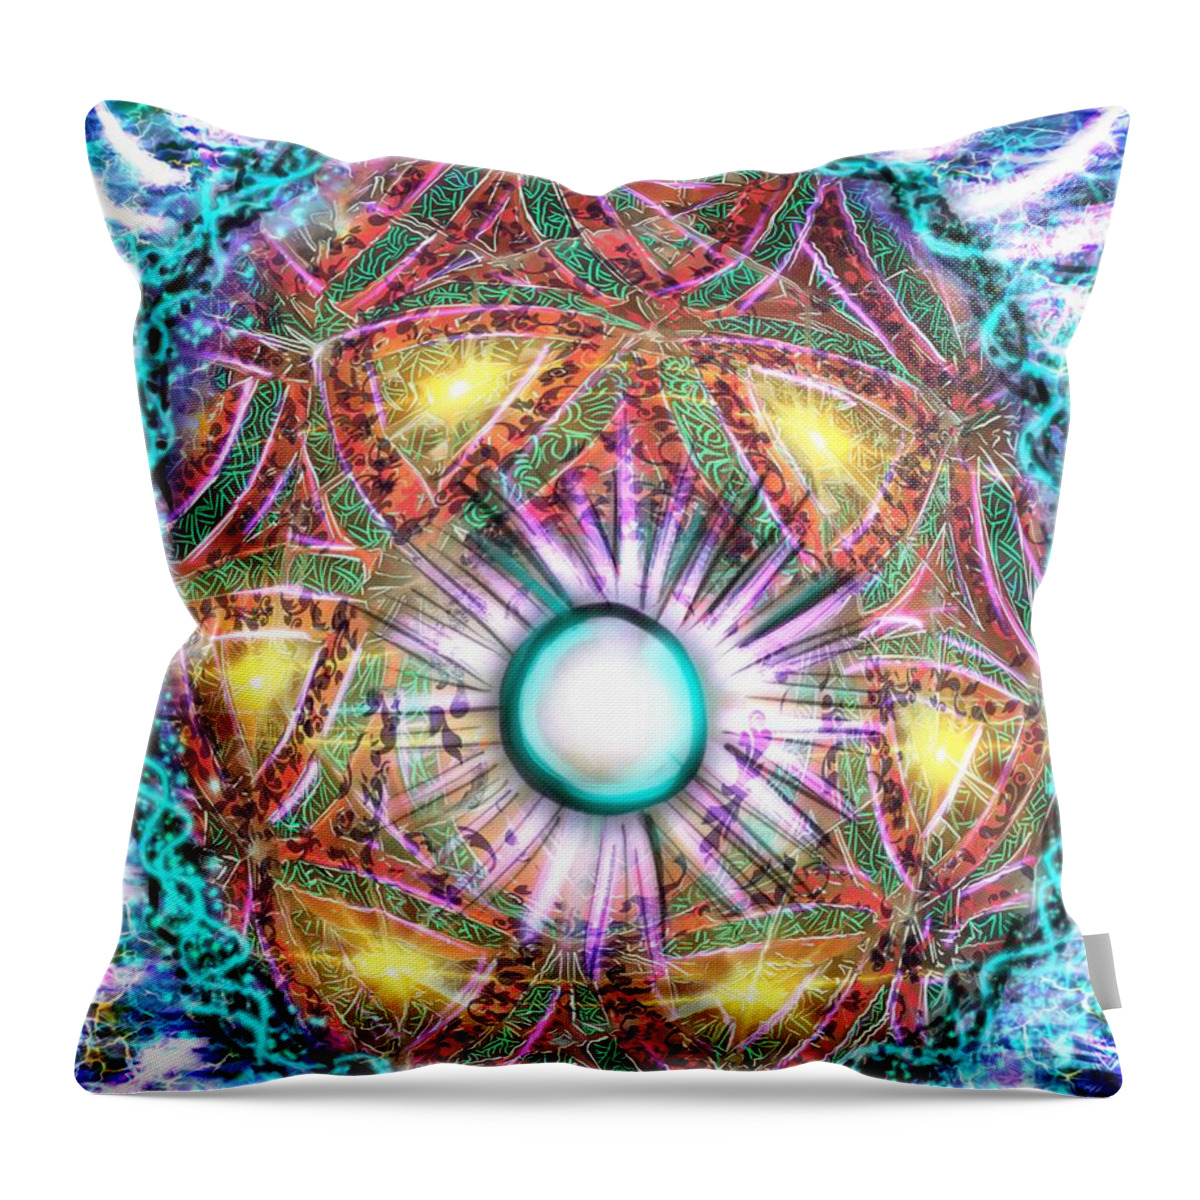 Kaleidoscope Throw Pillow featuring the digital art Centered by Angela Weddle